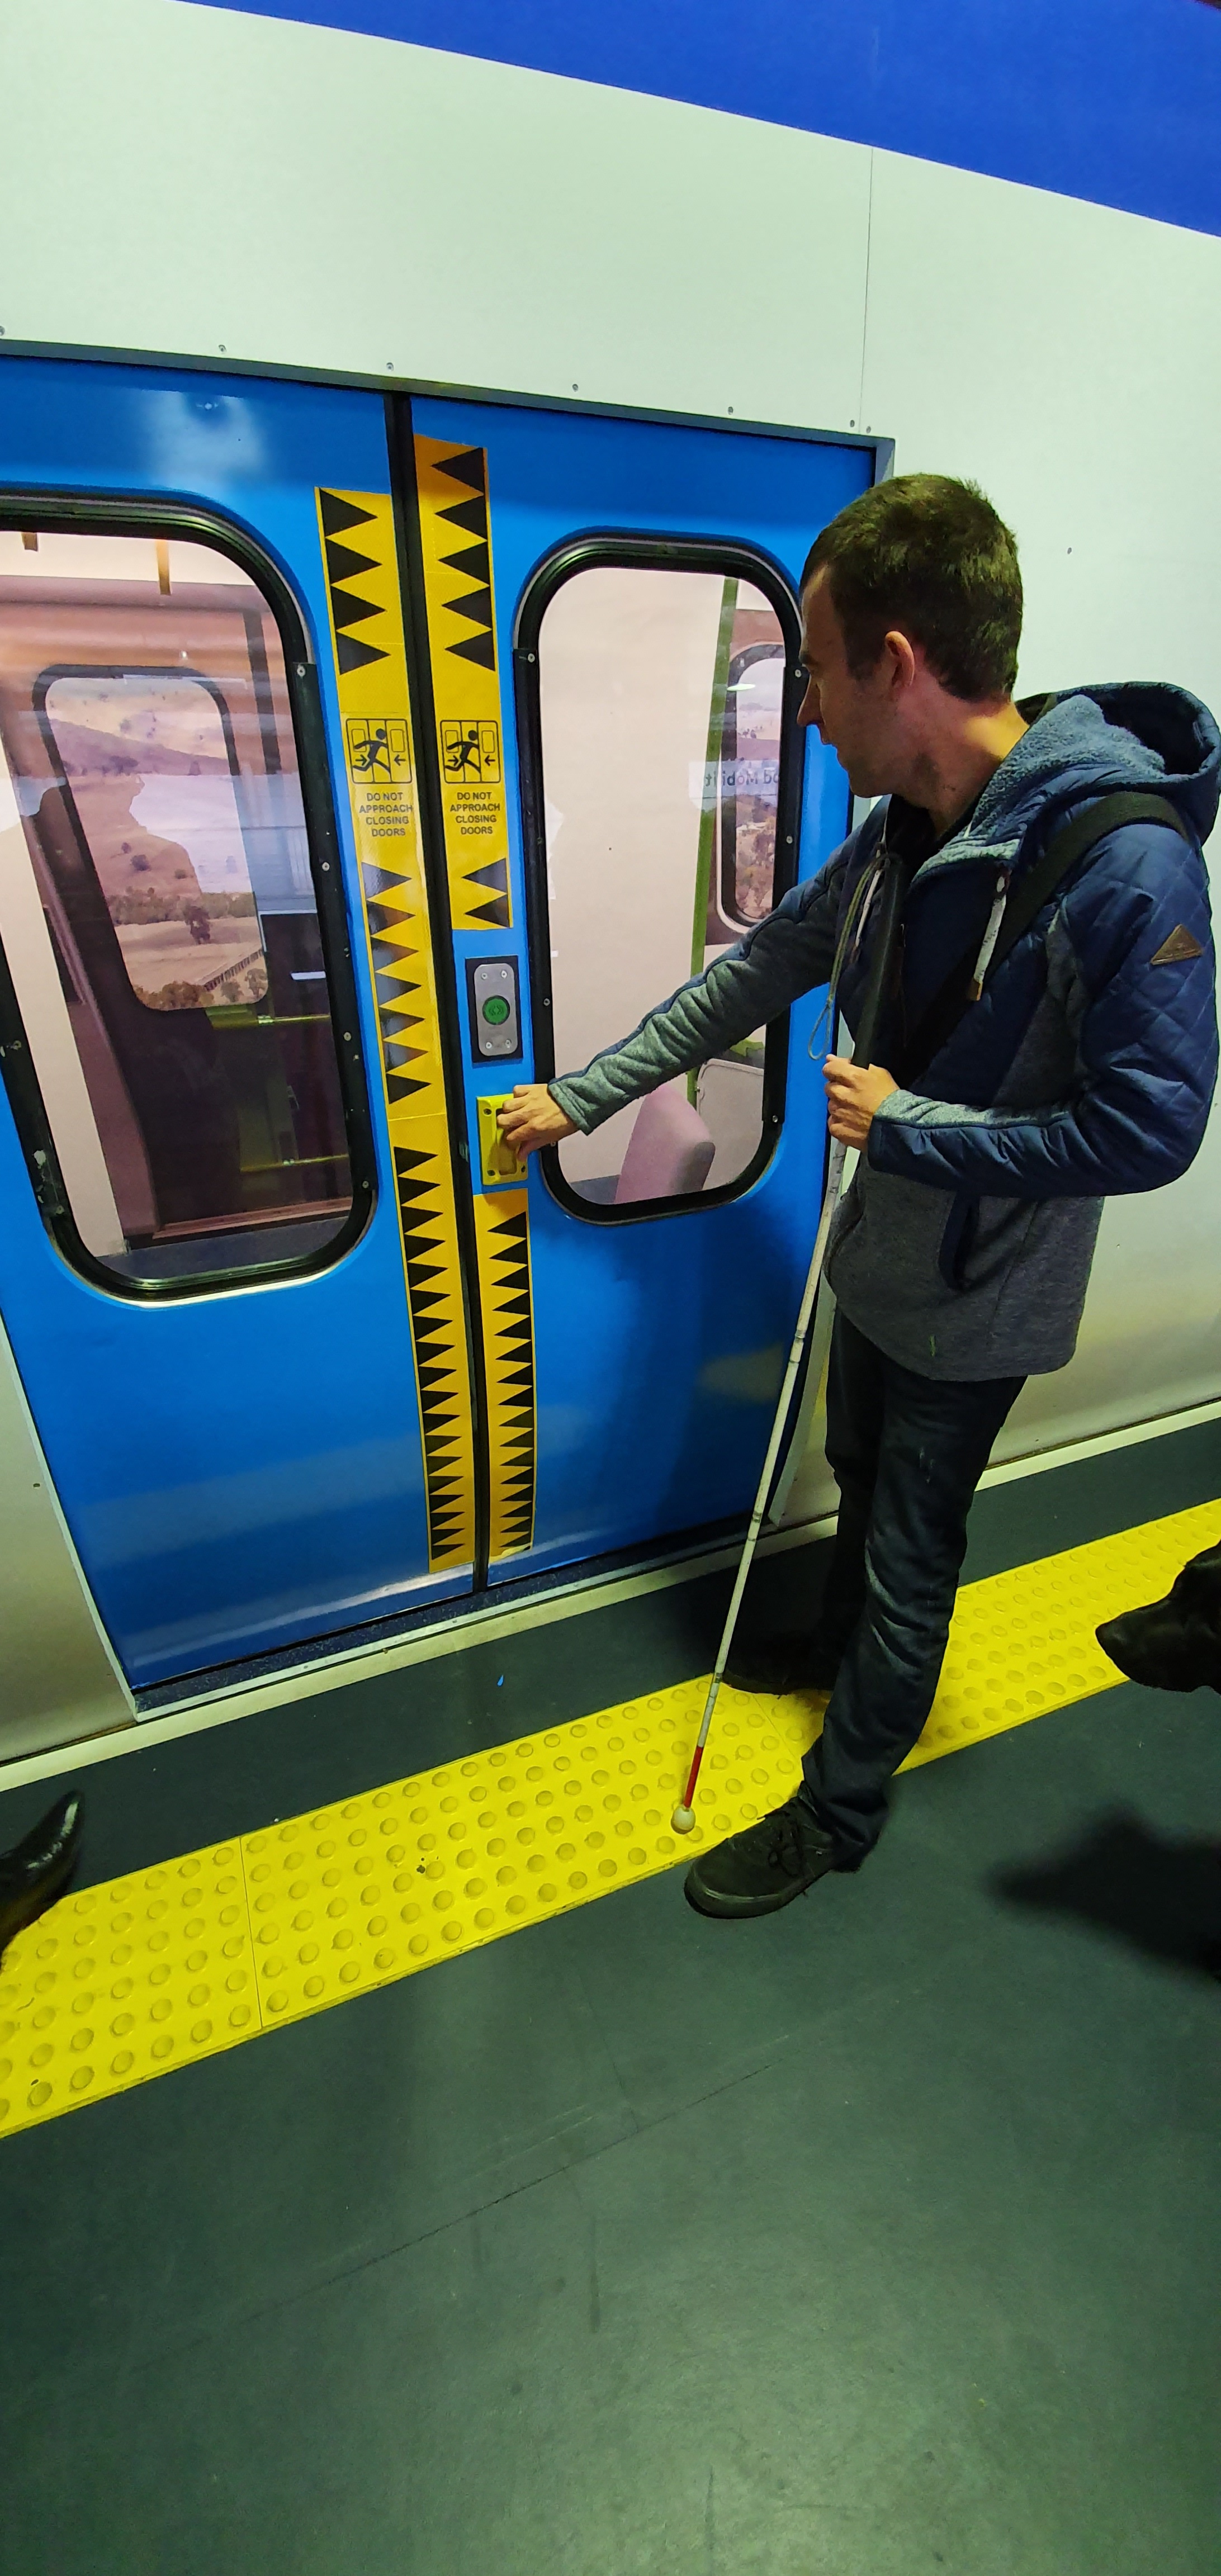 Shane, a client with Vision Australia, feels around a train door for the new button